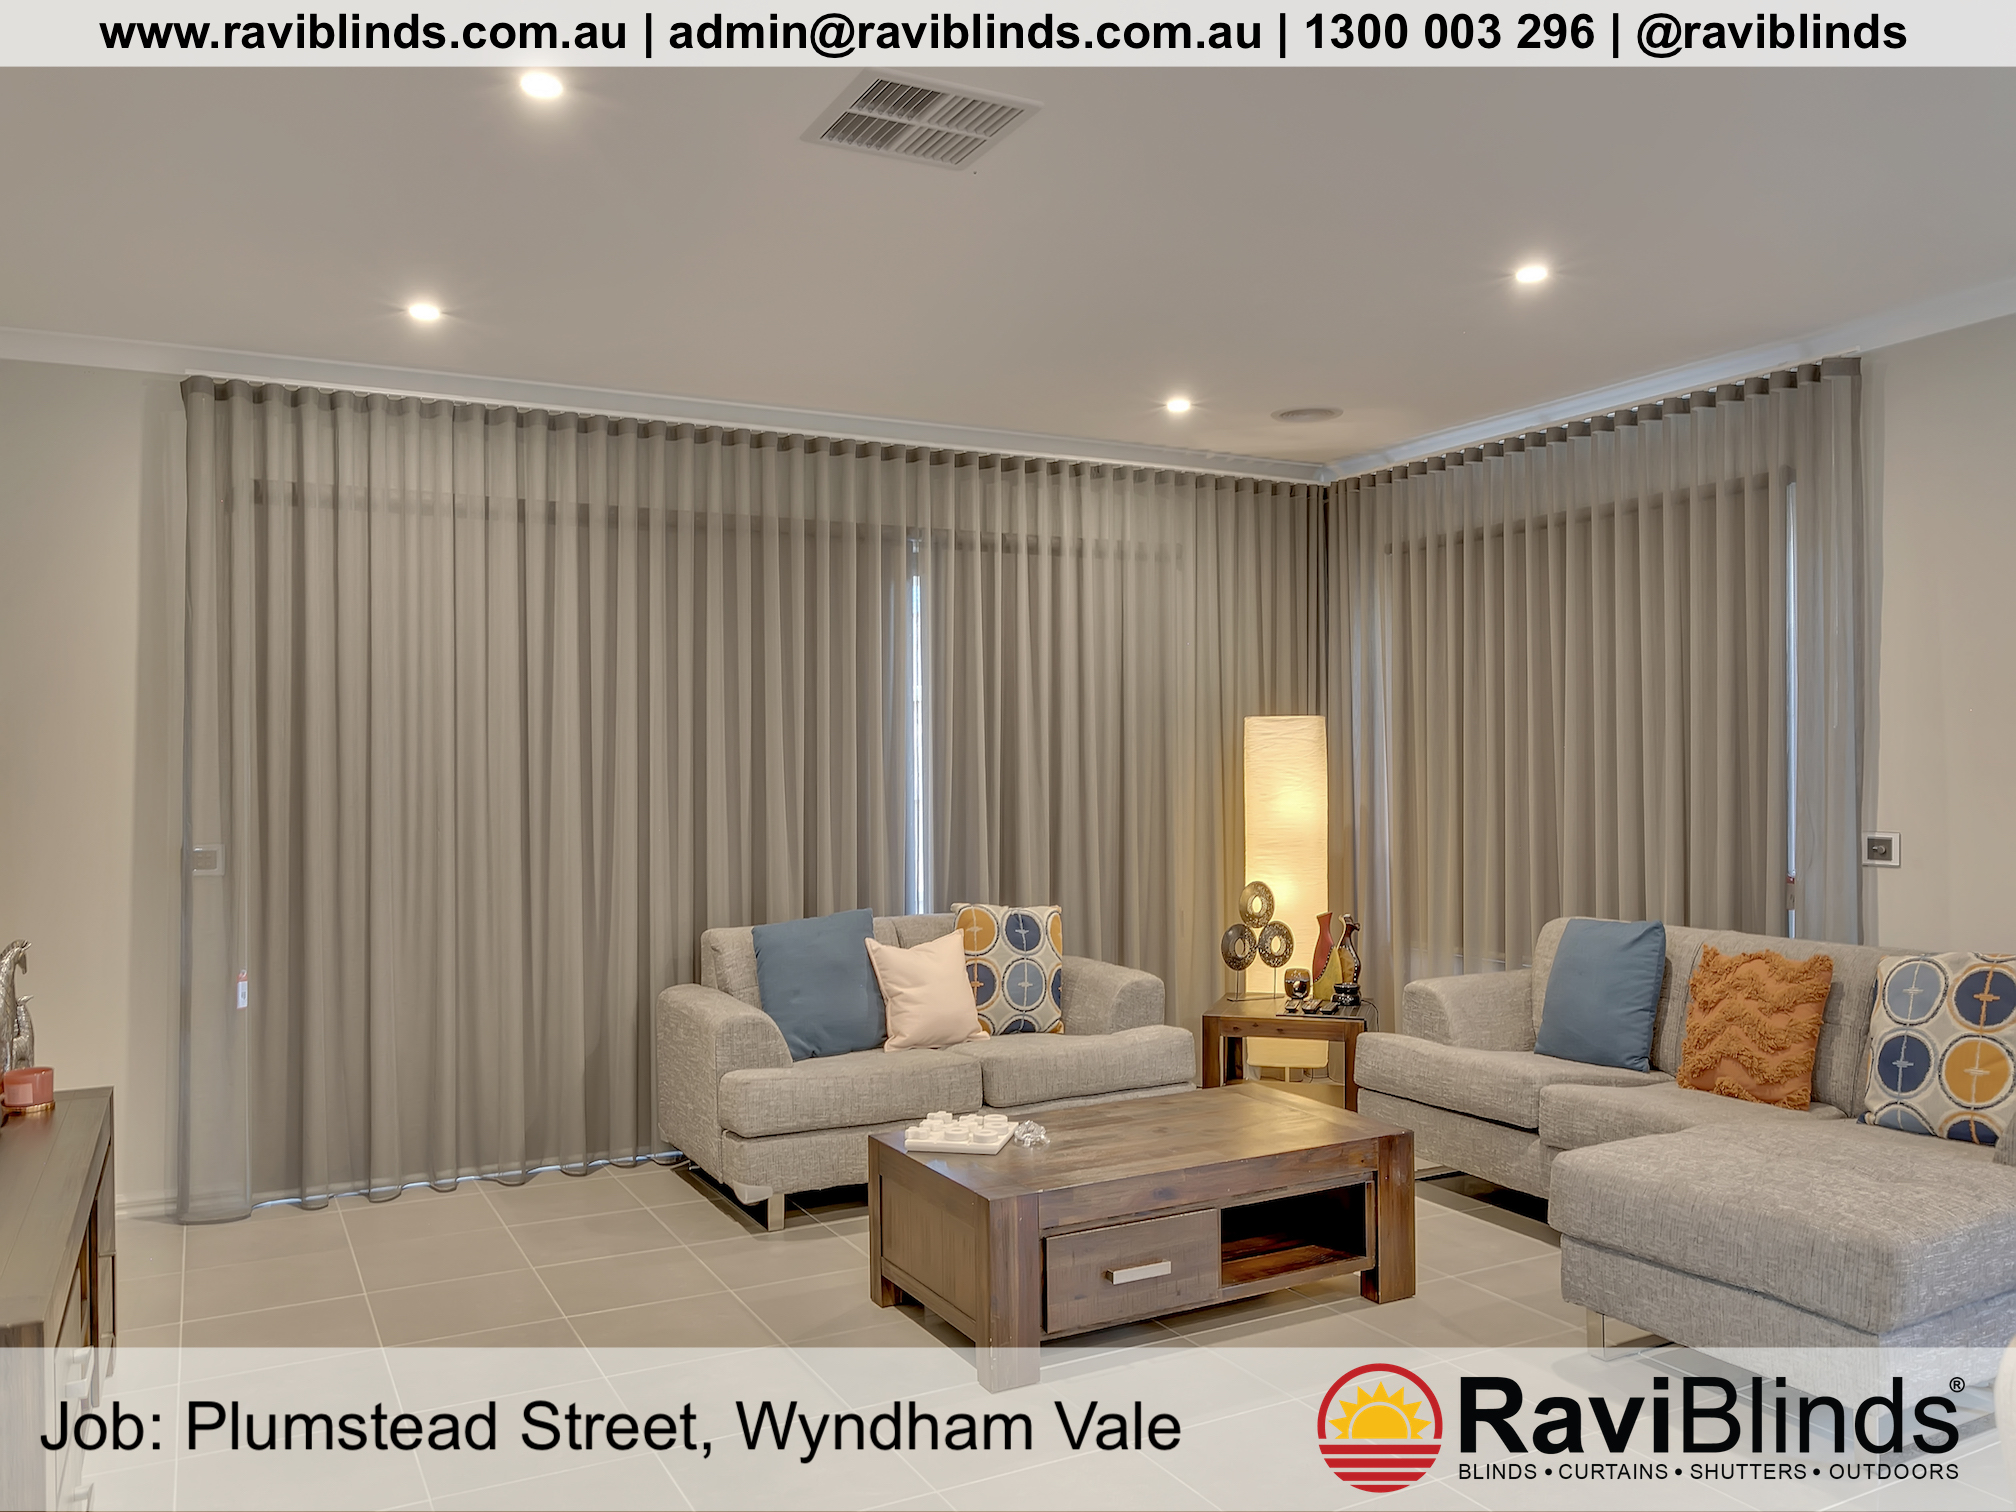 Roller Blinds and S-Fold Sheers Wyndham Vale Roller Blinds and S-Fold Sheers Melbourne